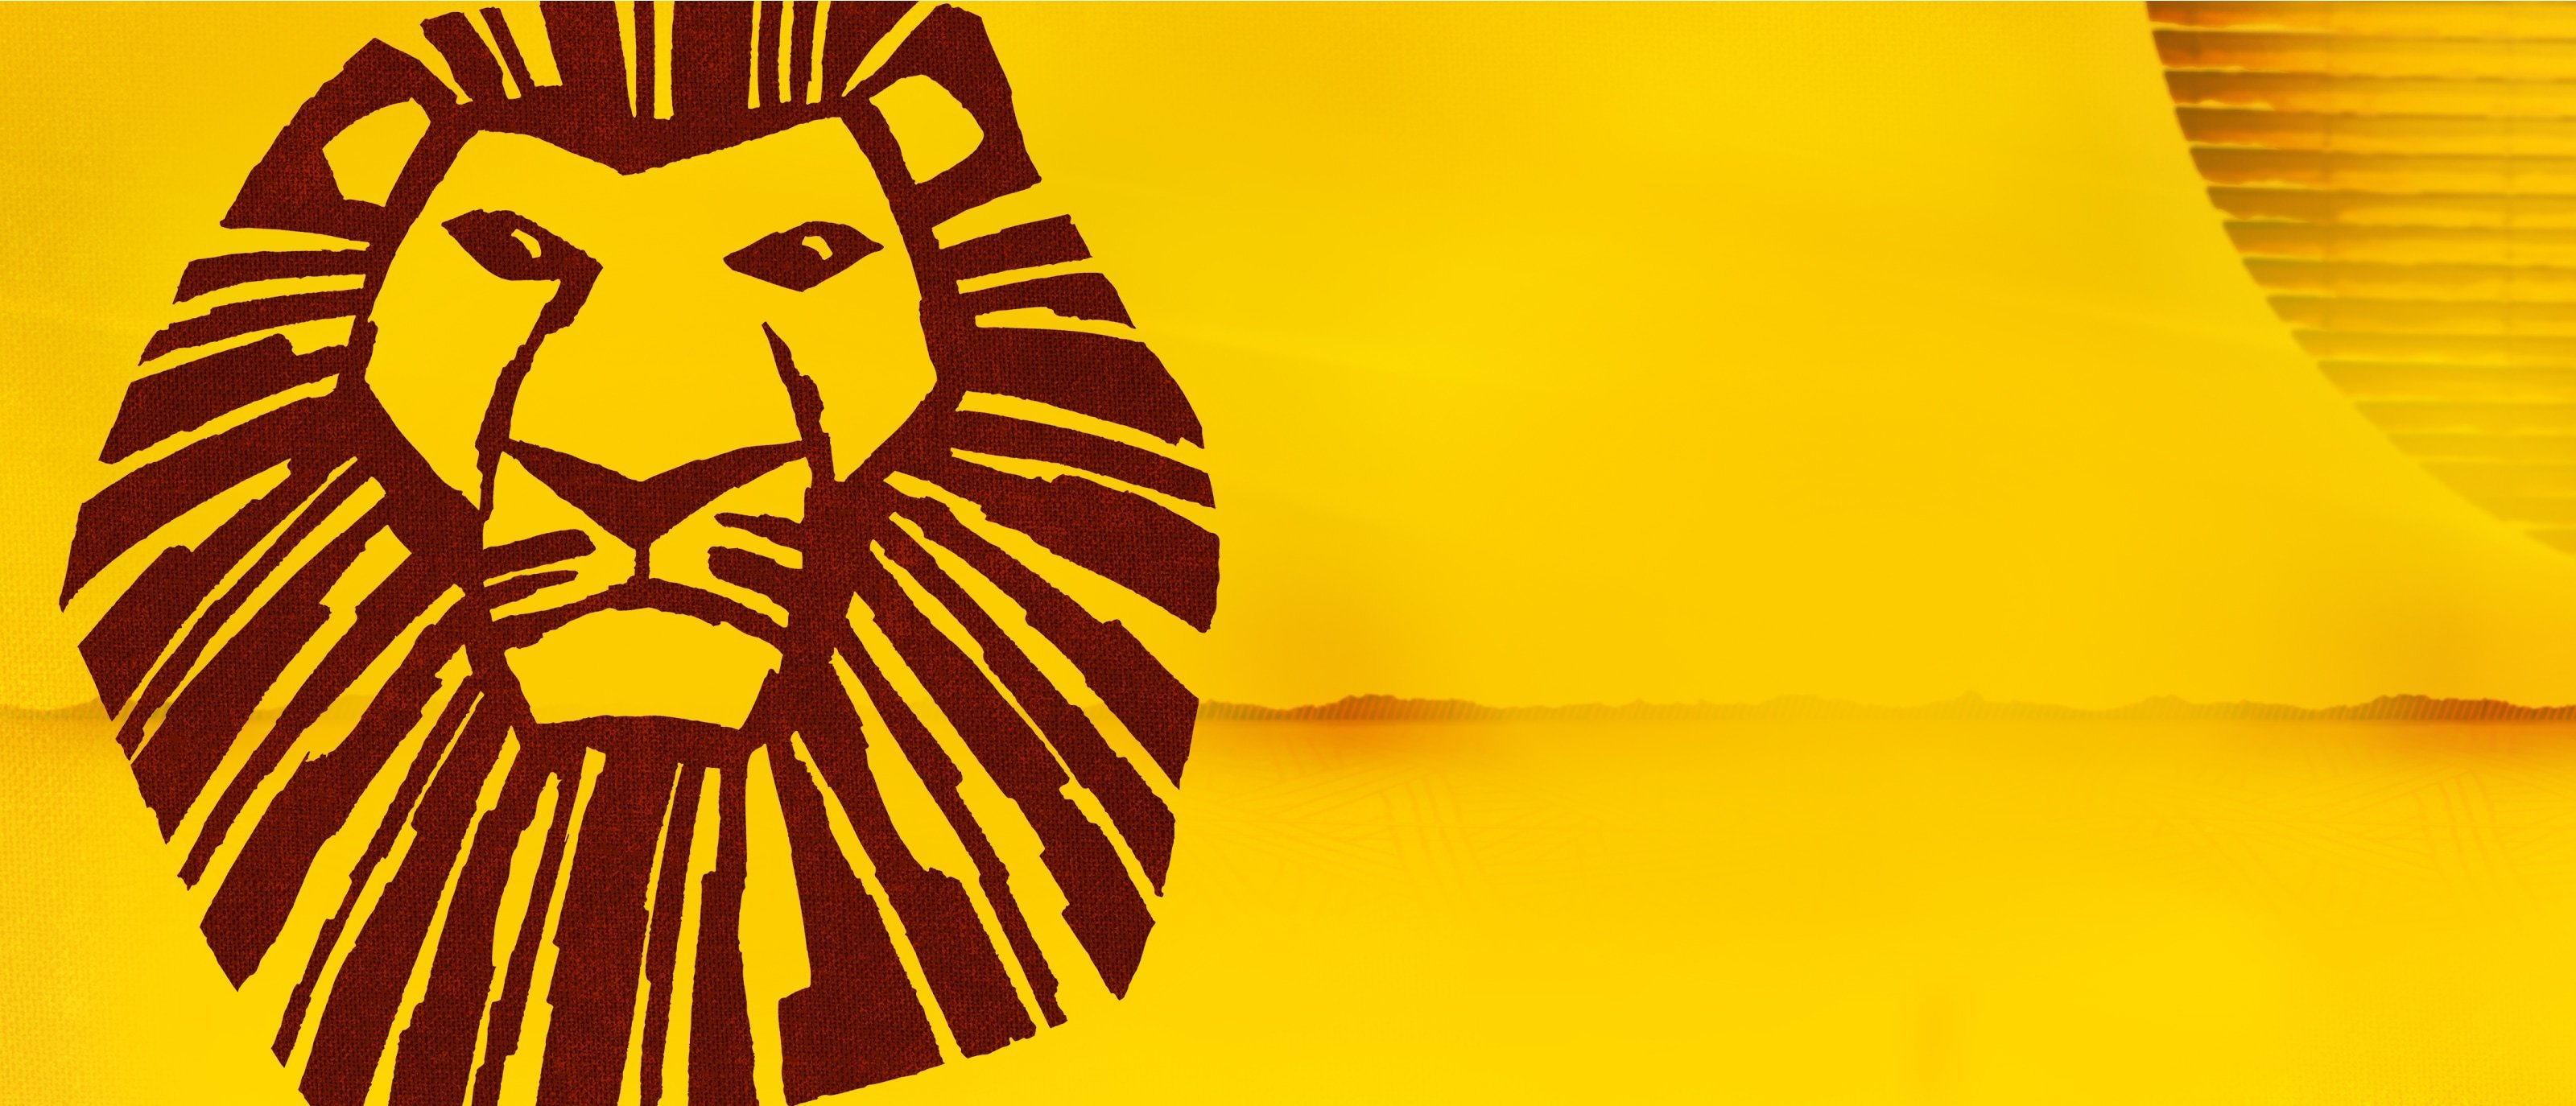 The Lion King Musical on Tour across the UK and Ireland